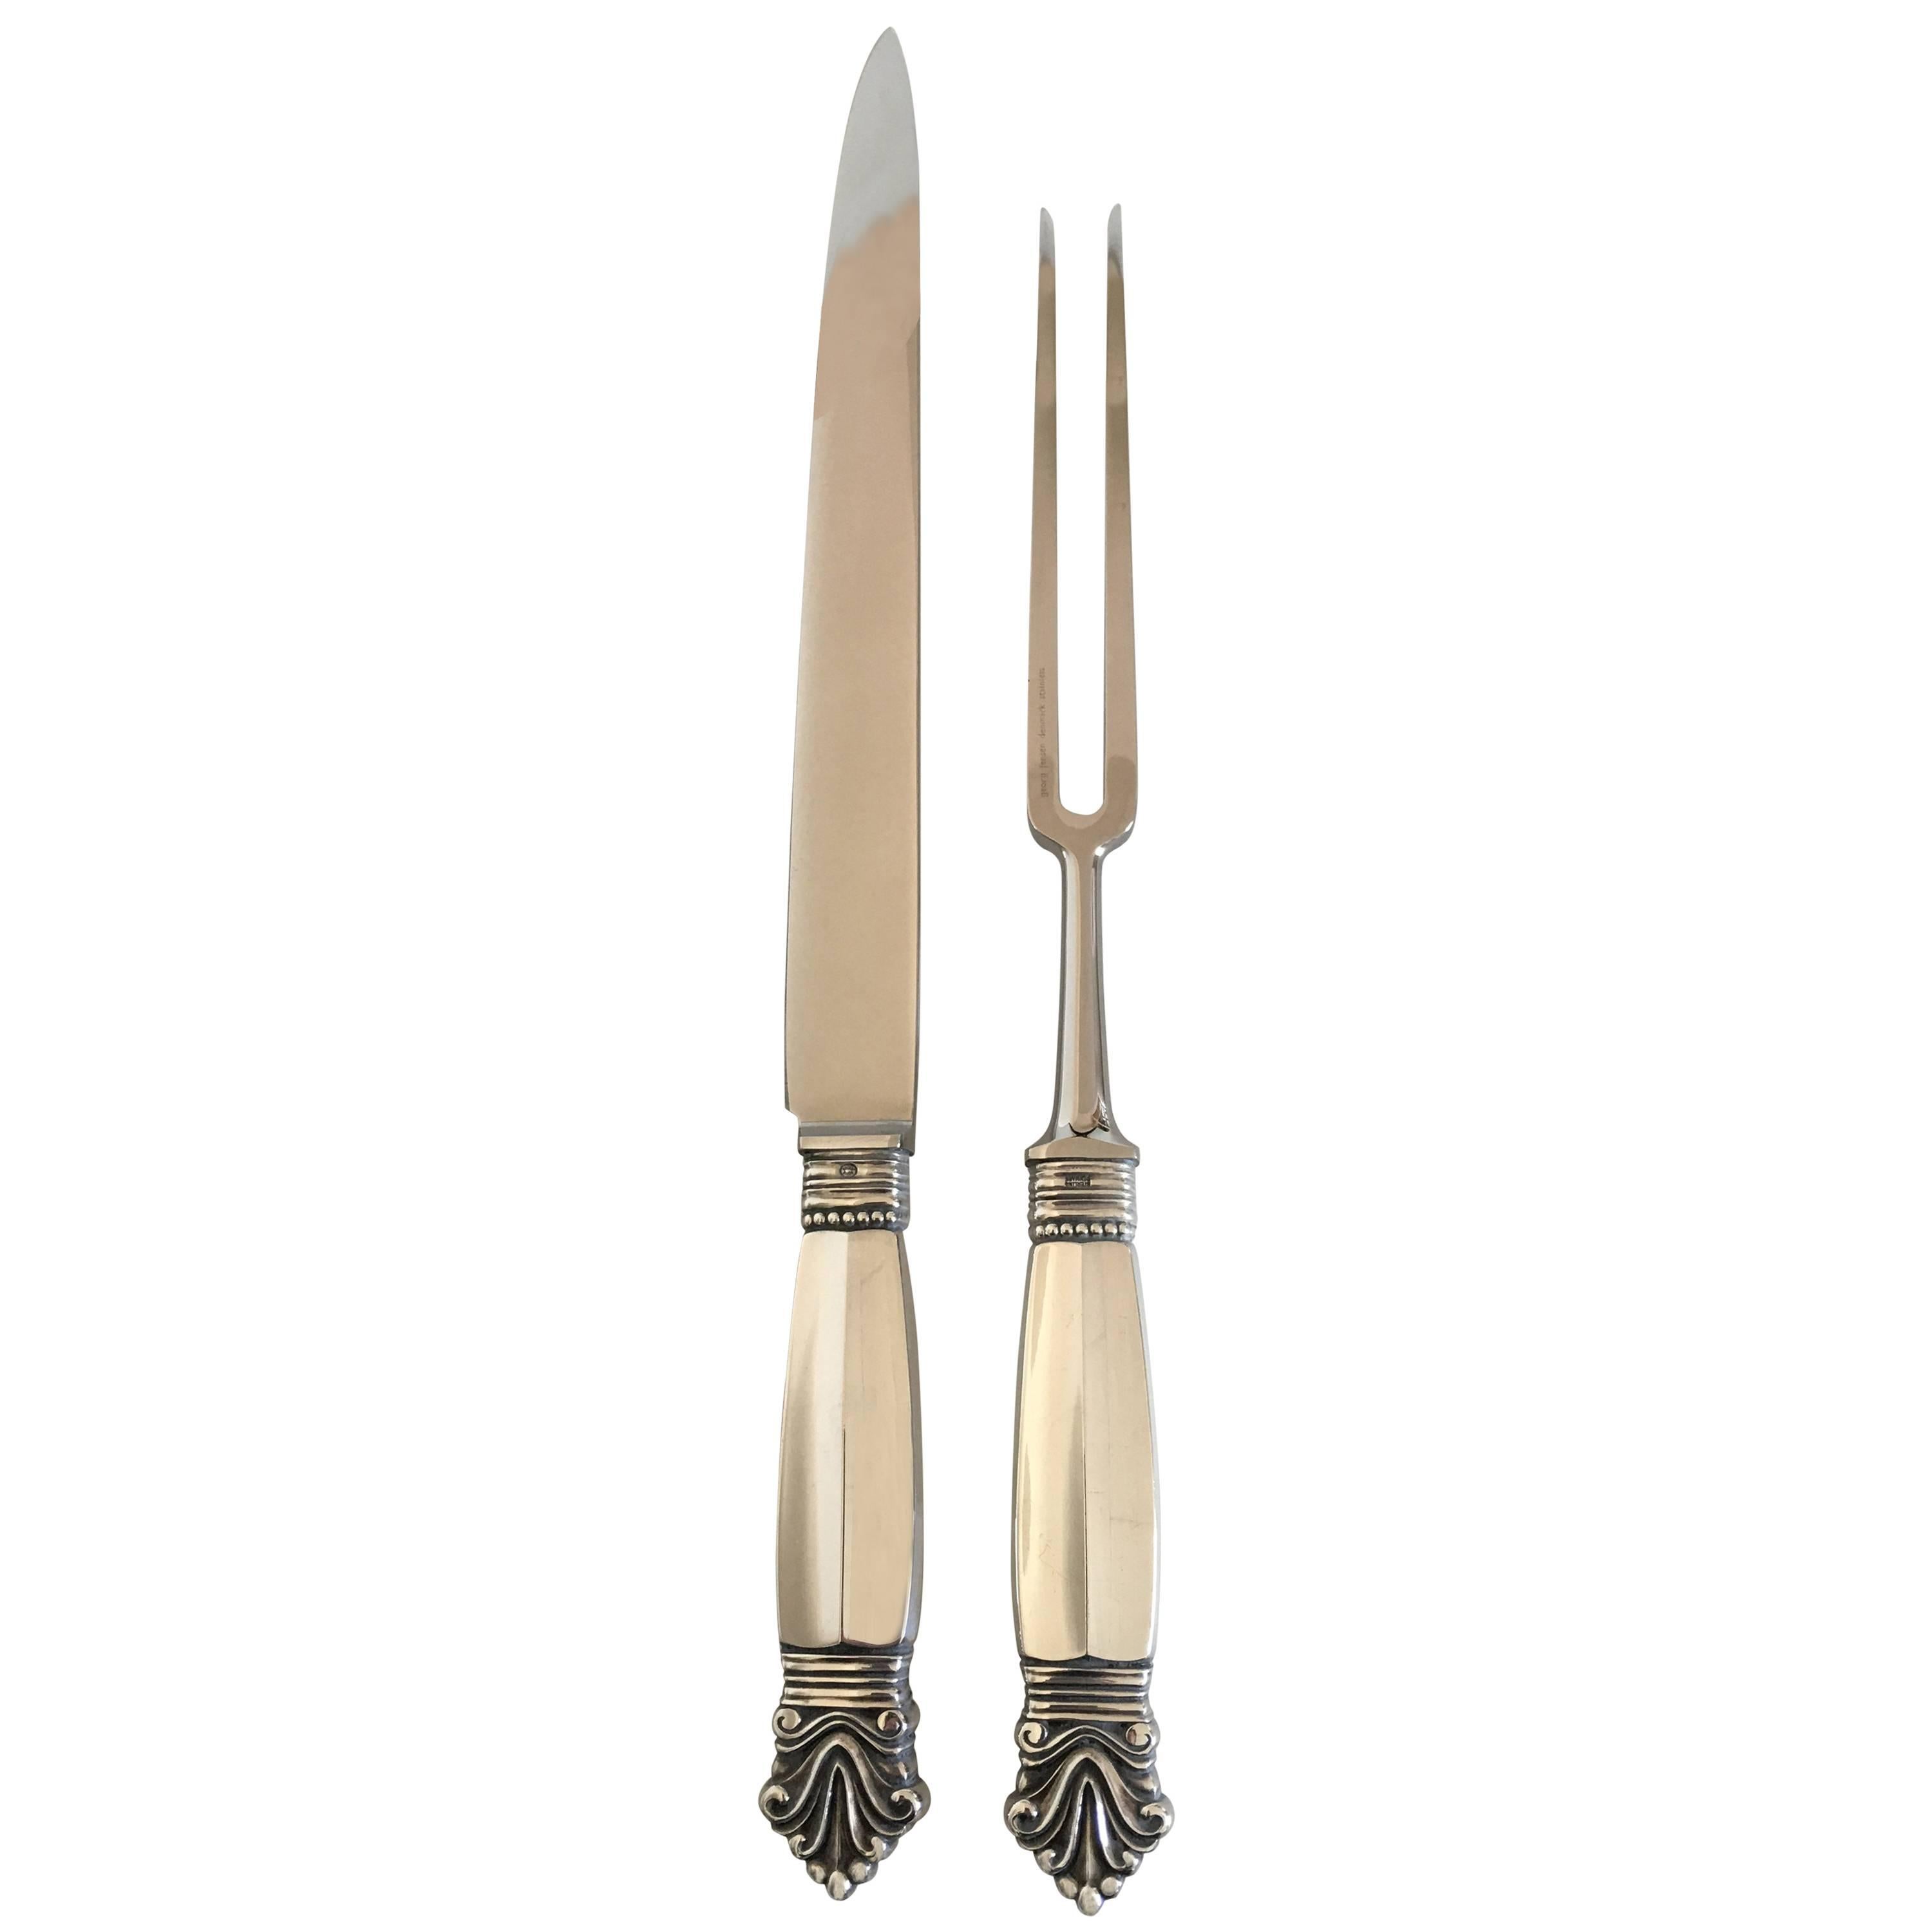 Georg Jensen Acanthus Carving Set in Sterling Silver and Stainless Steel